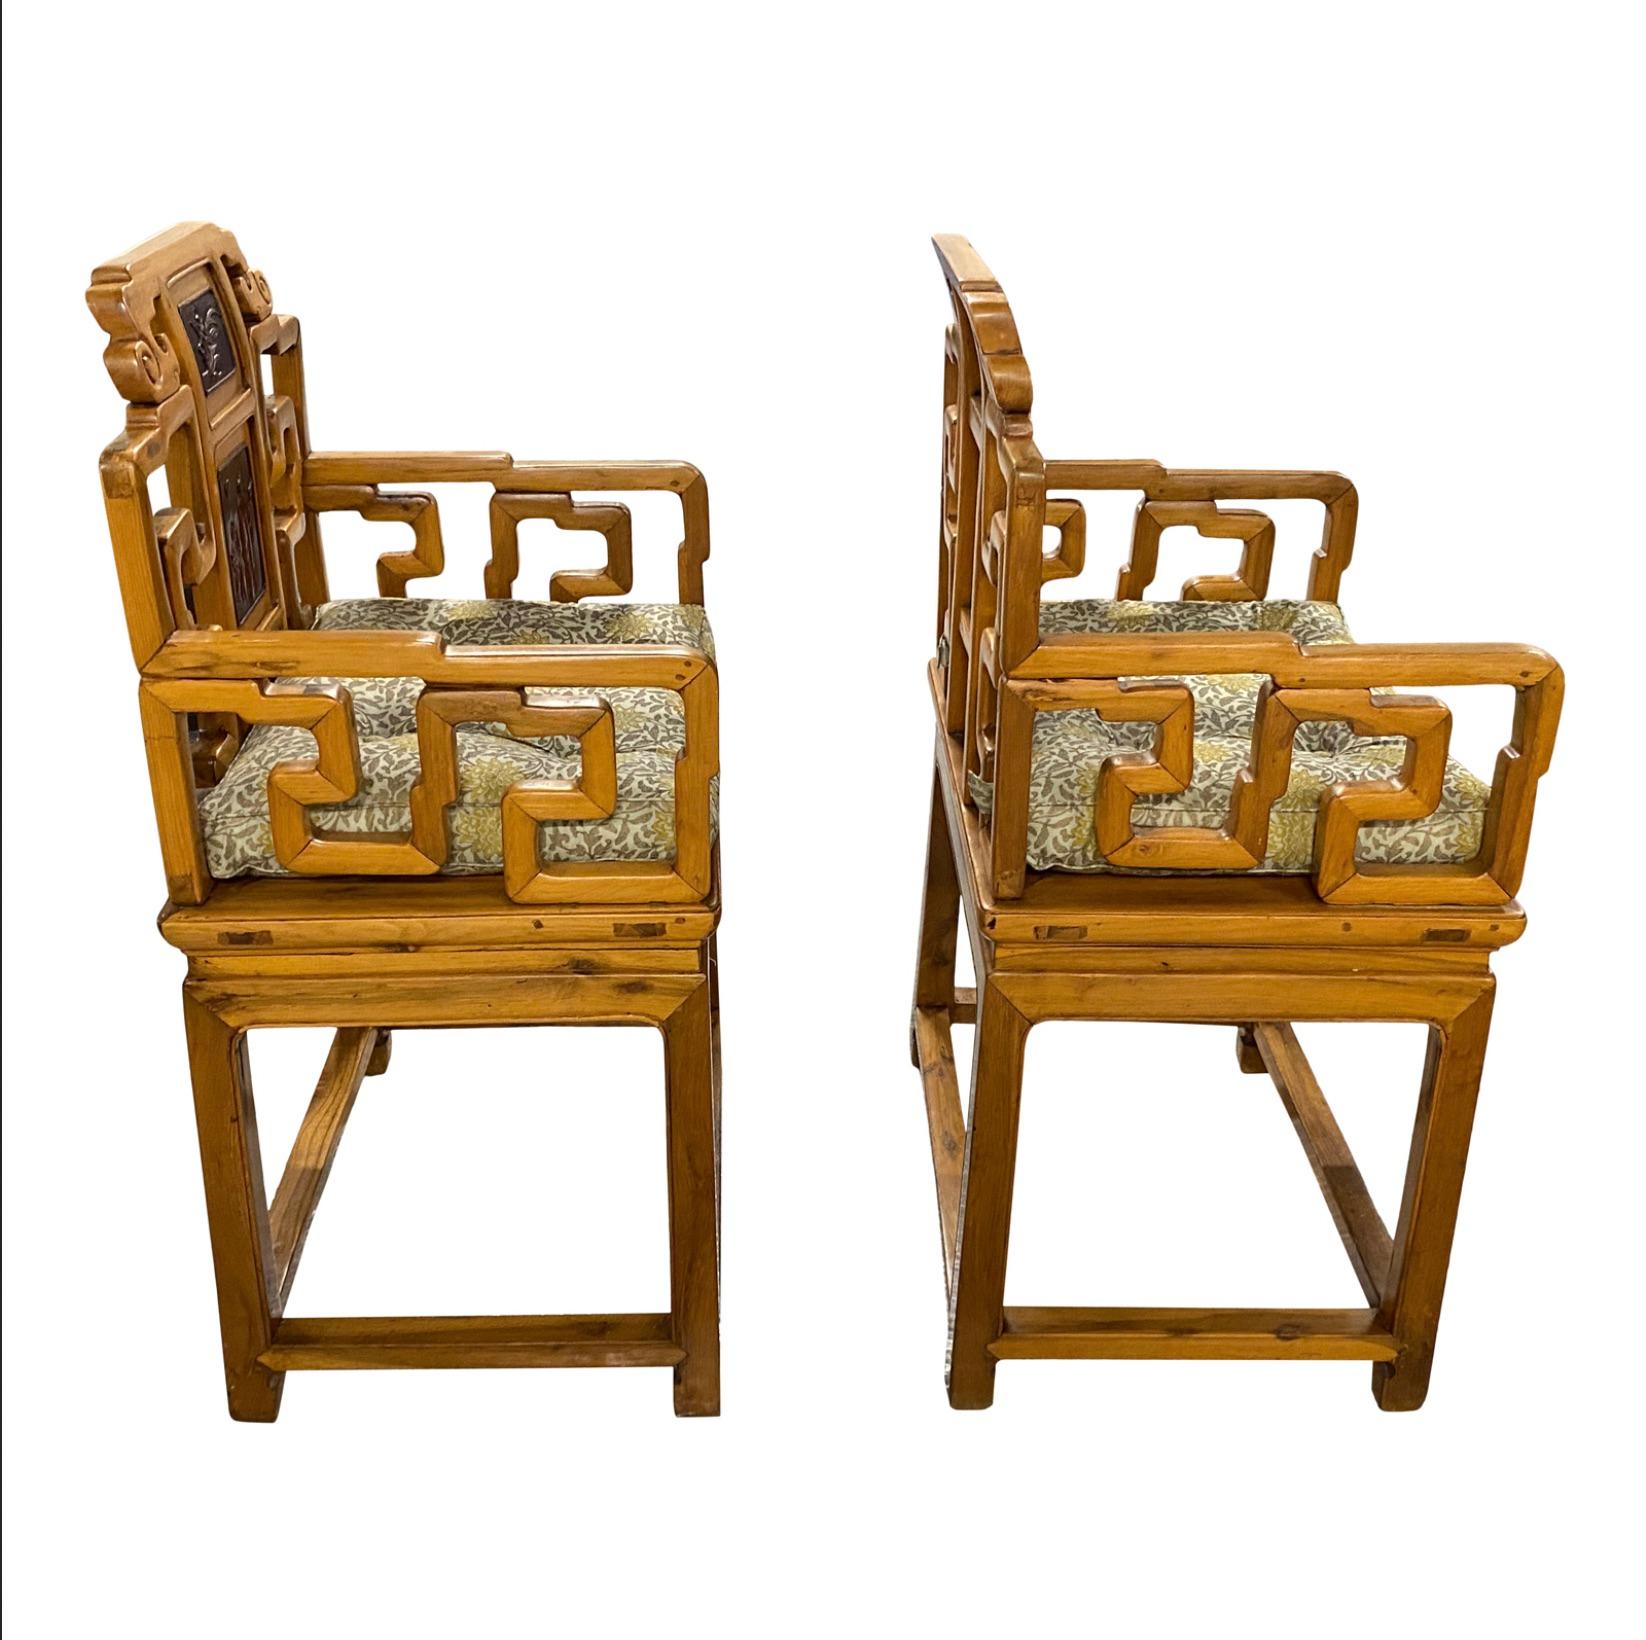 Pair of Early 20th Century Chinese Altar Chairs with Lacquered Panels and Muriel Brandolini Cushions 

39